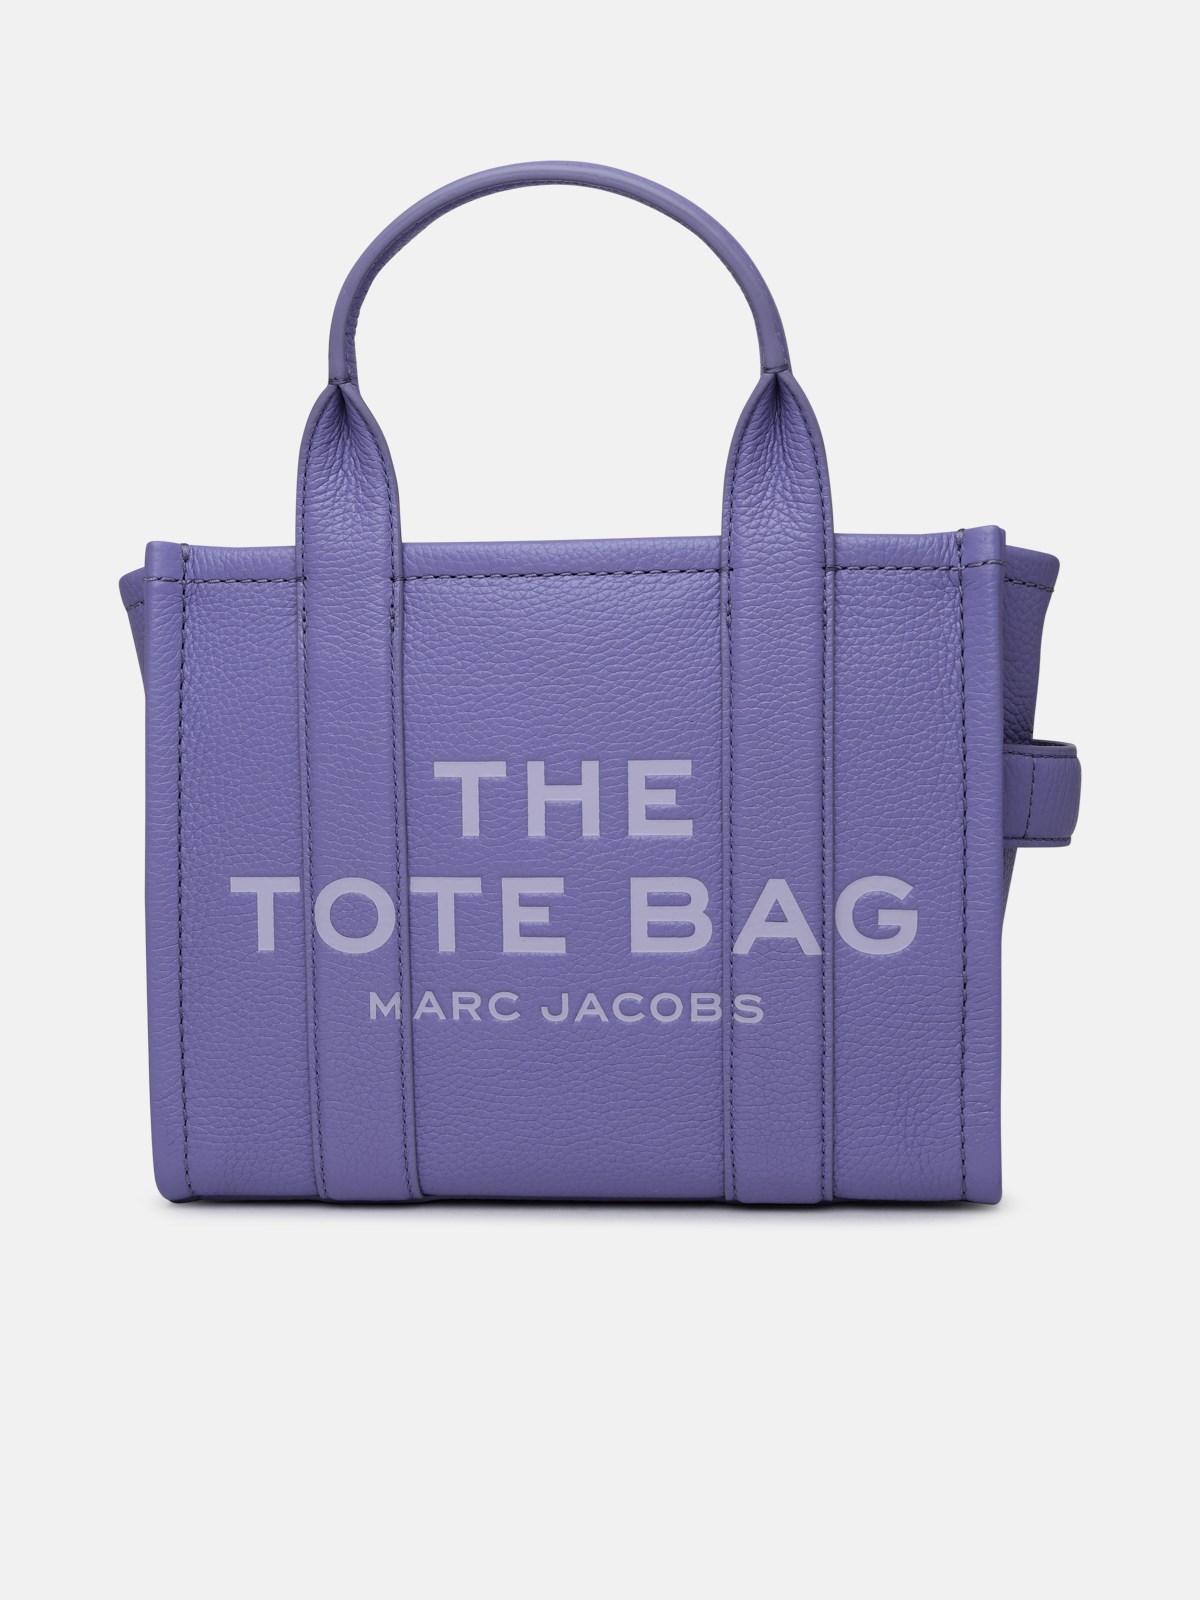 Marc Jacobs Marc Jacobs (the) Lilac Leather Mini Tote Bag in Purple | Lyst